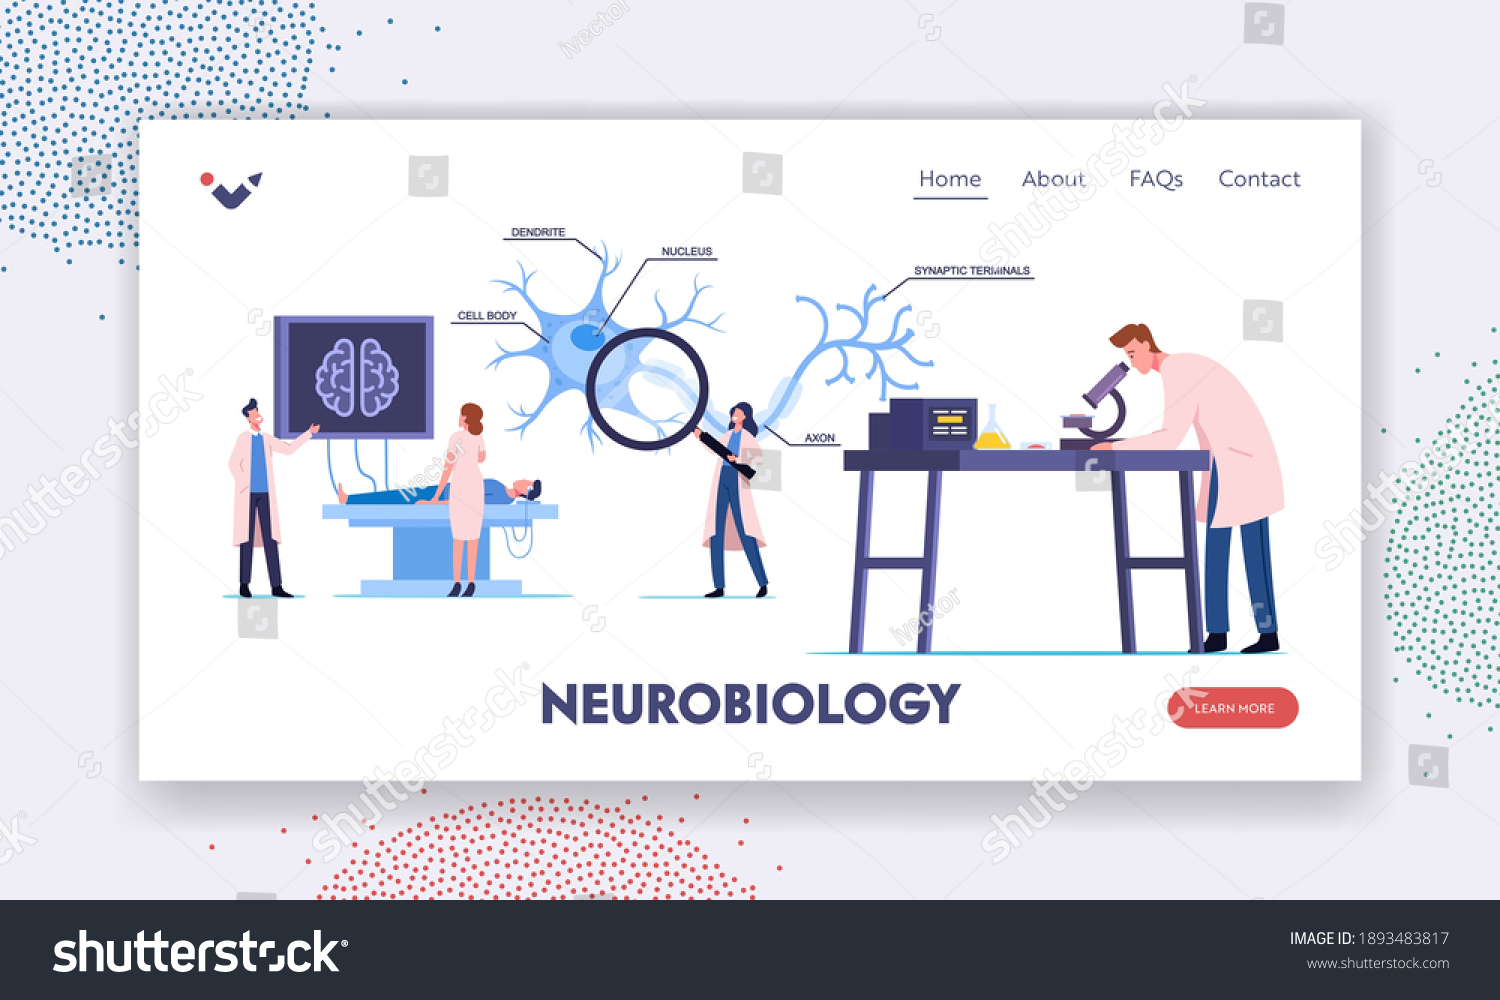 SVG of Scientists Characters Learning Human Brain in Laboratory Landing Page Template. People in Lab with Scheme of Dendrite, Cell Body, Axon and Nucleus with Synaptic Terminals. Cartoon Vector Illustration svg